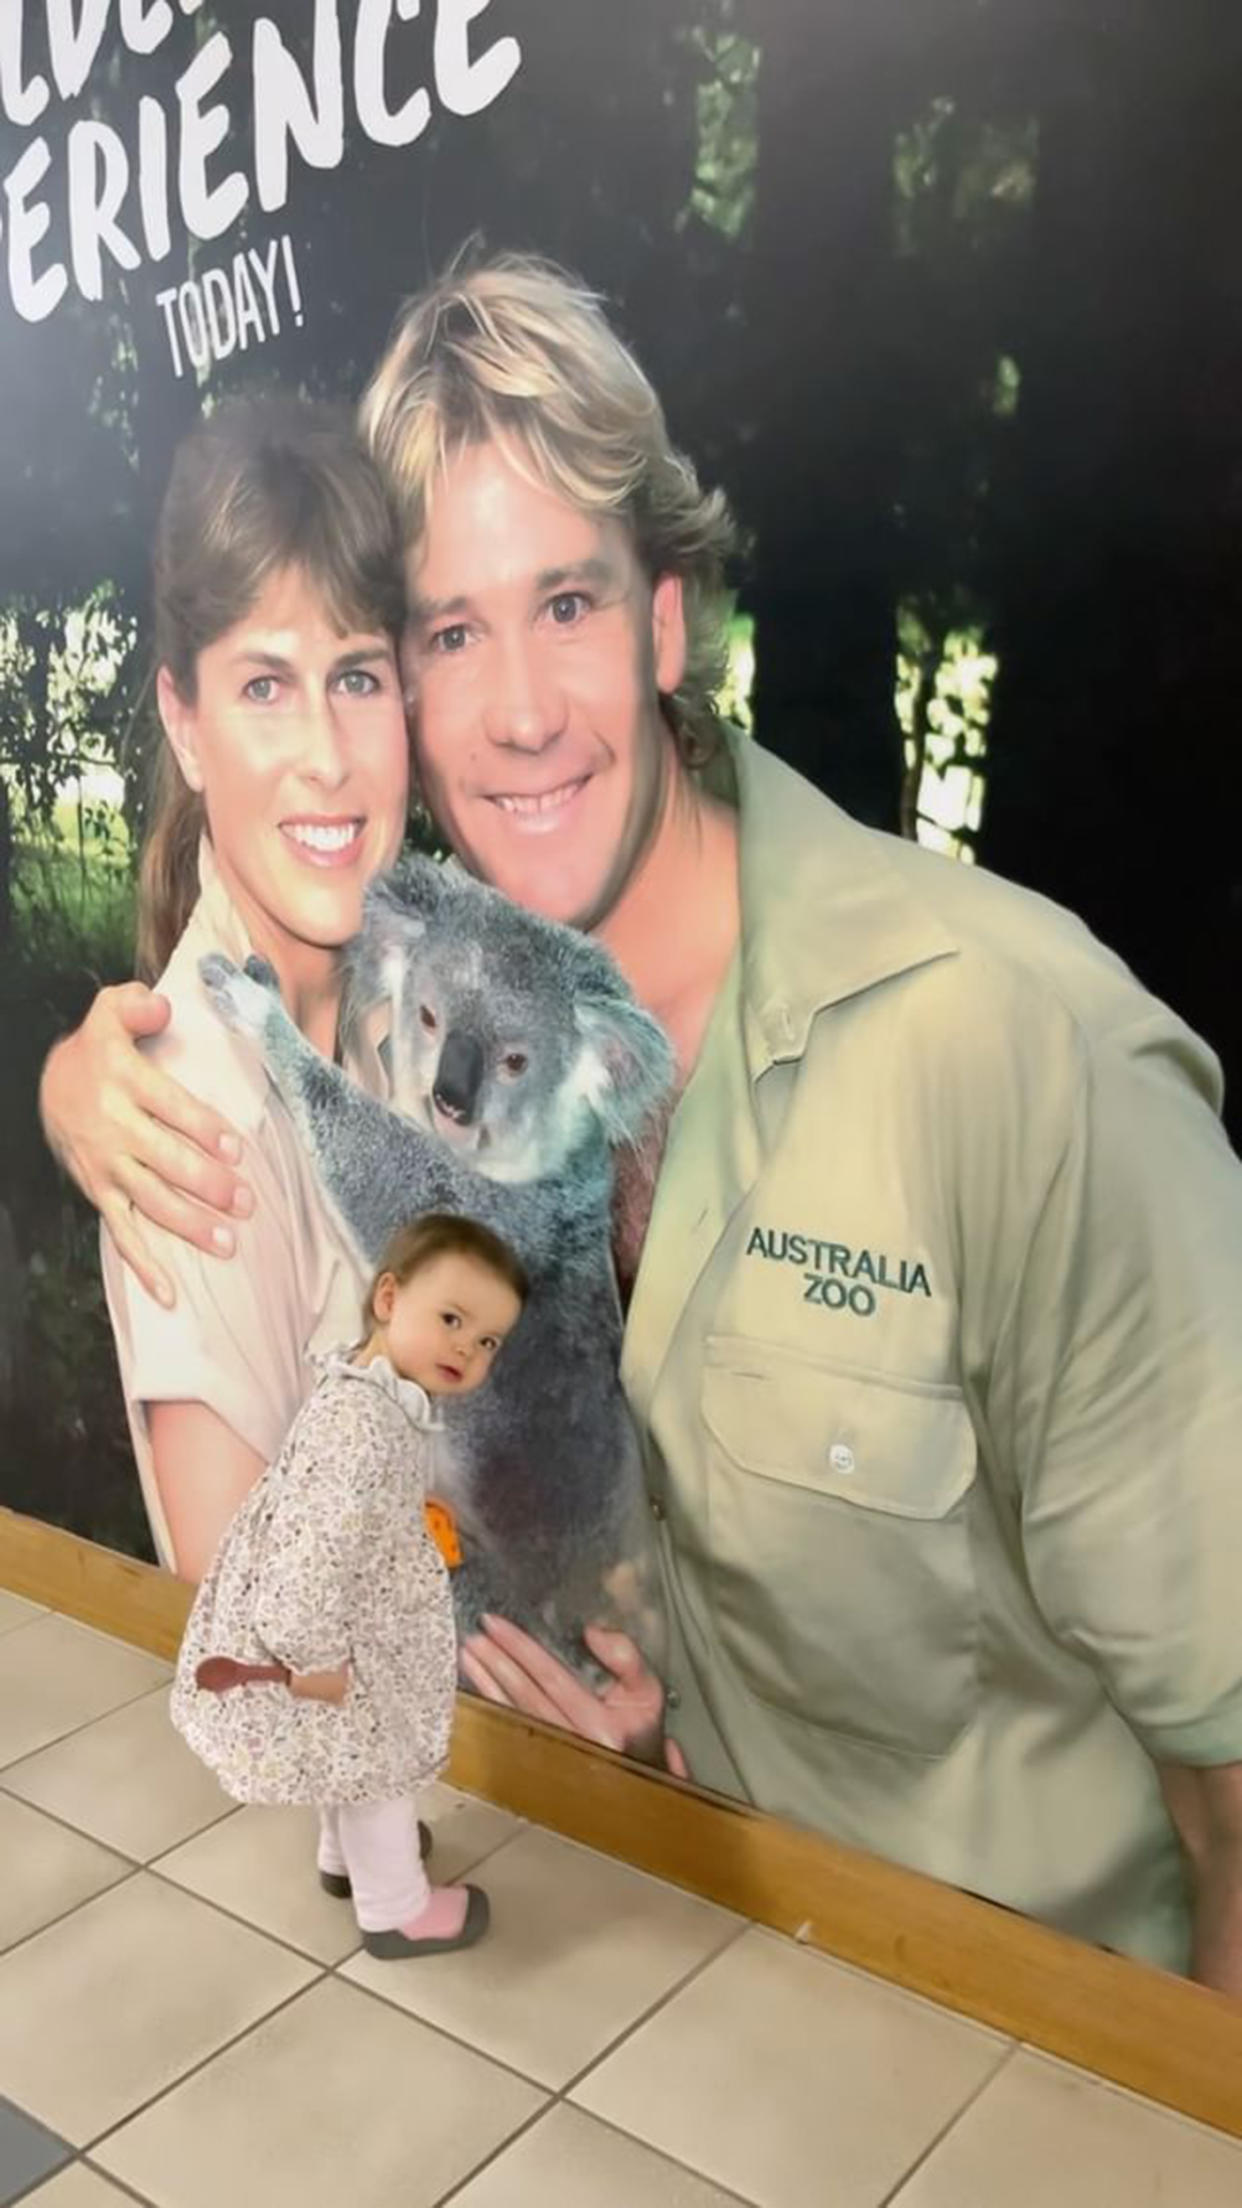 Grace Warrior poses with a photo of her grandparents at Australia Zoo. (@bindisueirwin via Instagram)